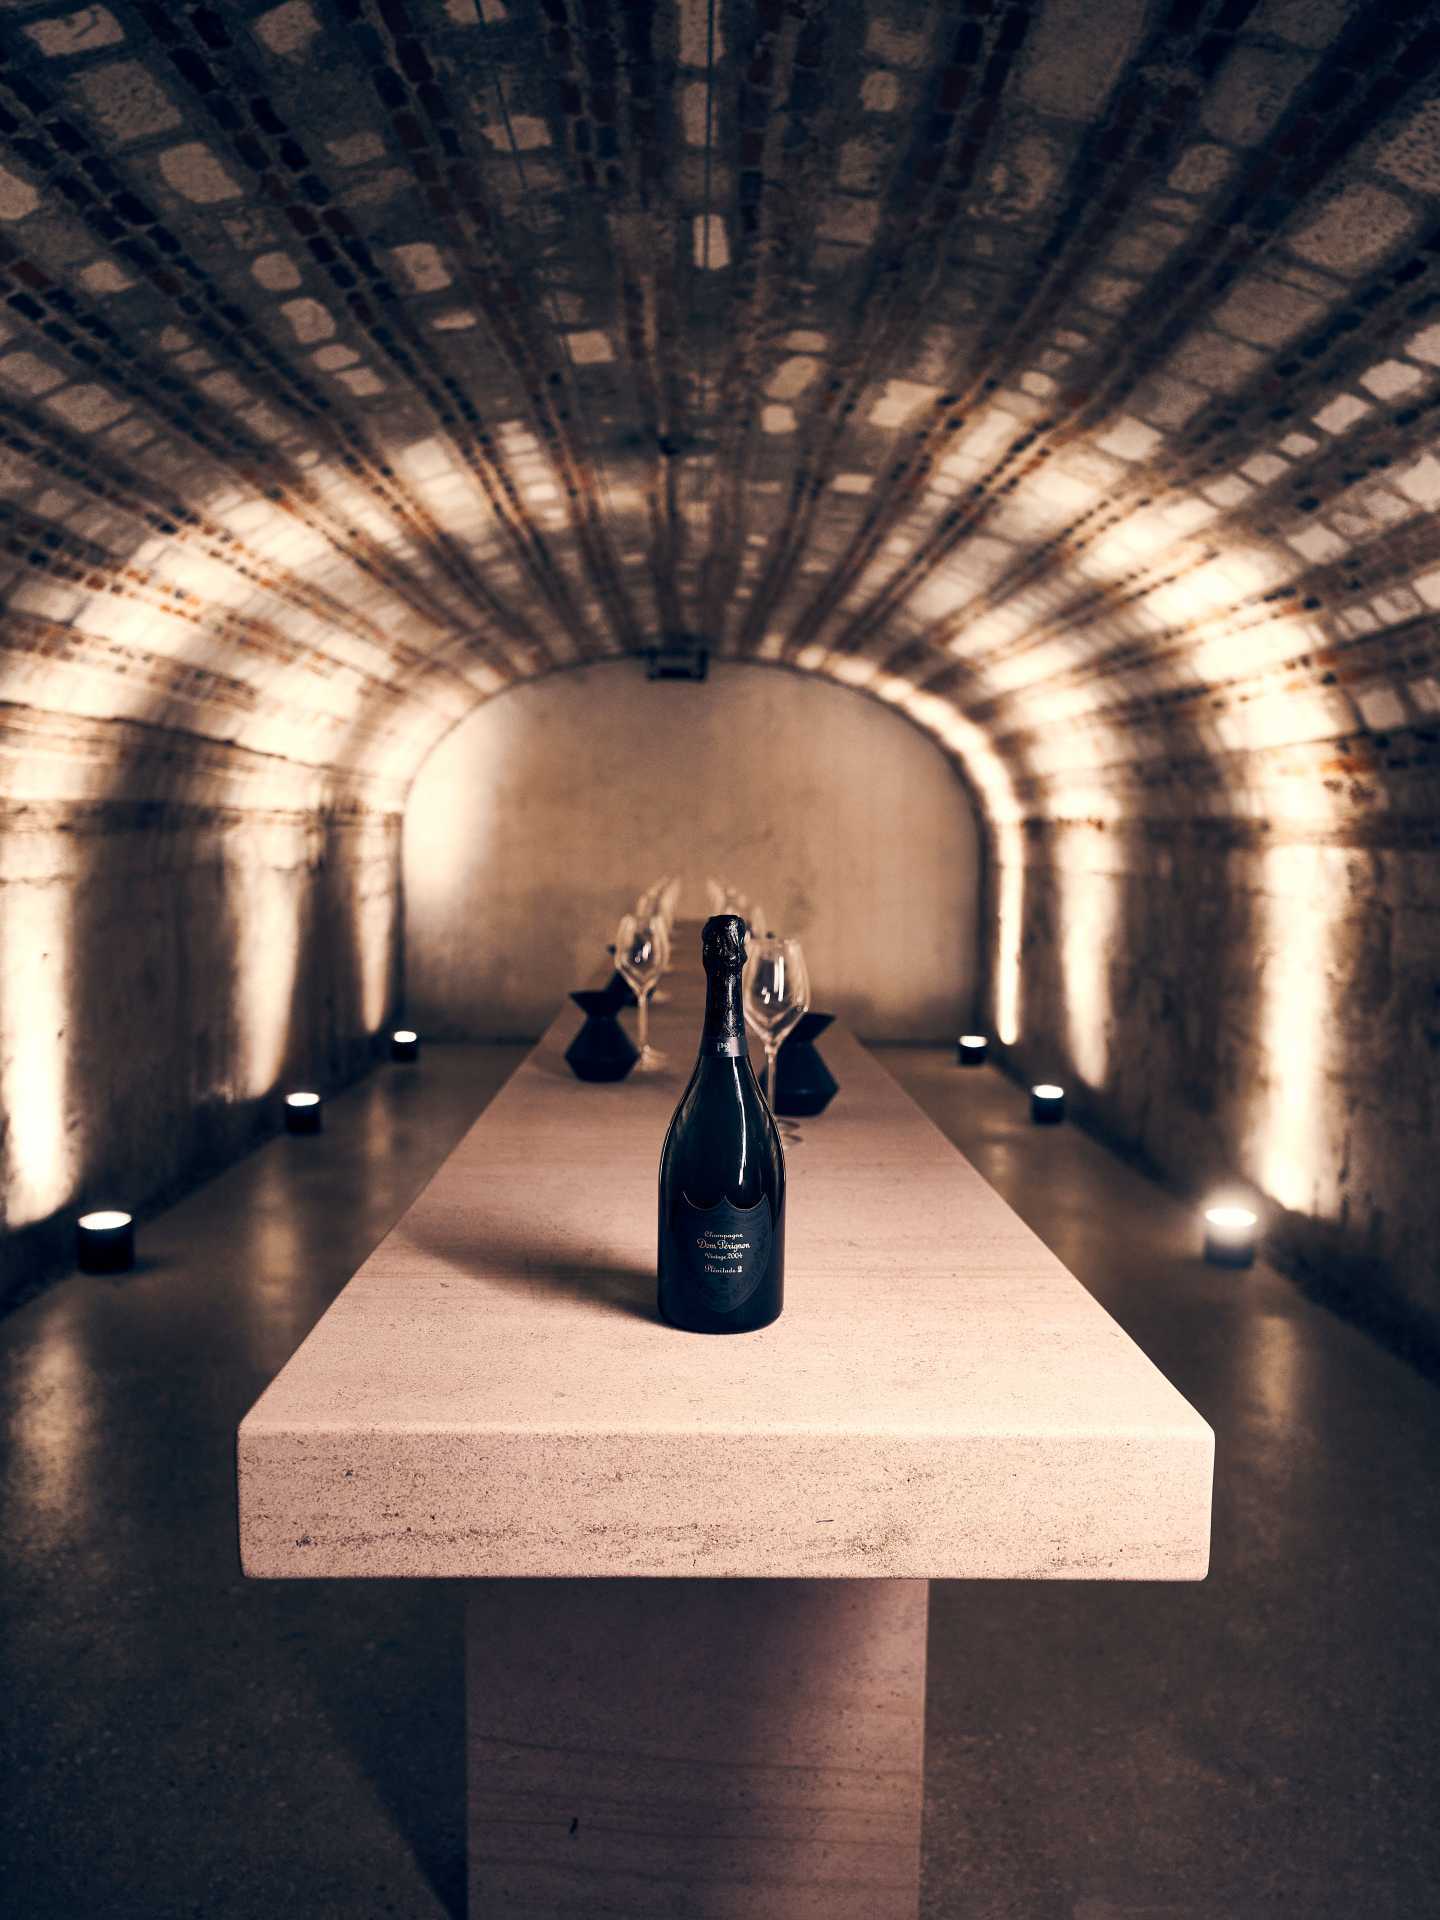 The ageing cellars at Moët et Chandon